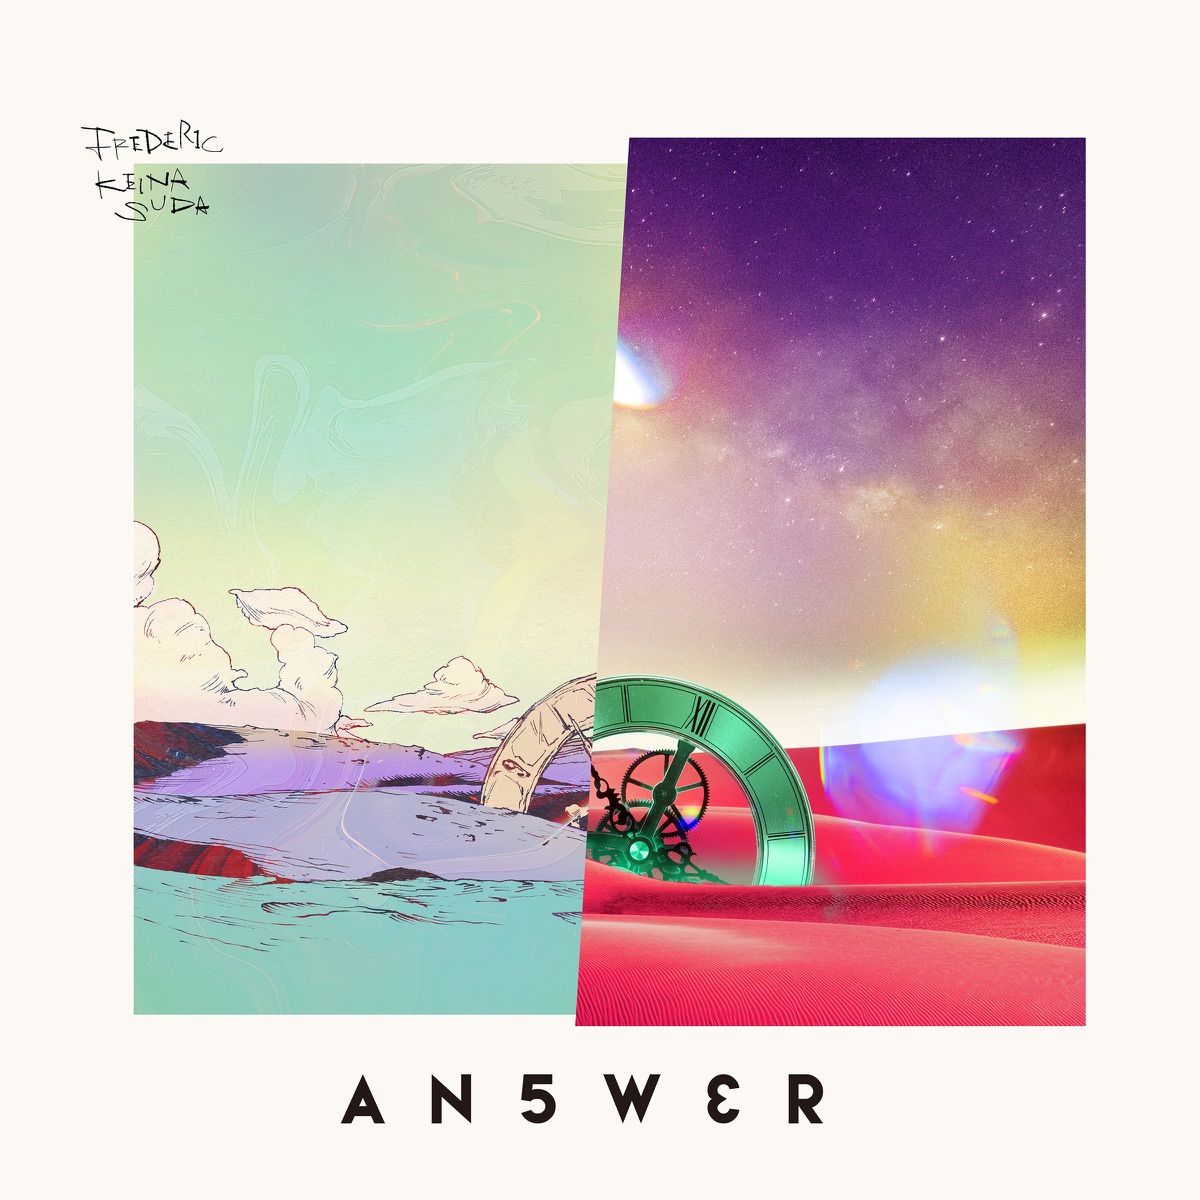 Cover art for『Frederic × Keina Suda - ANSWER』from the release『ANSWER